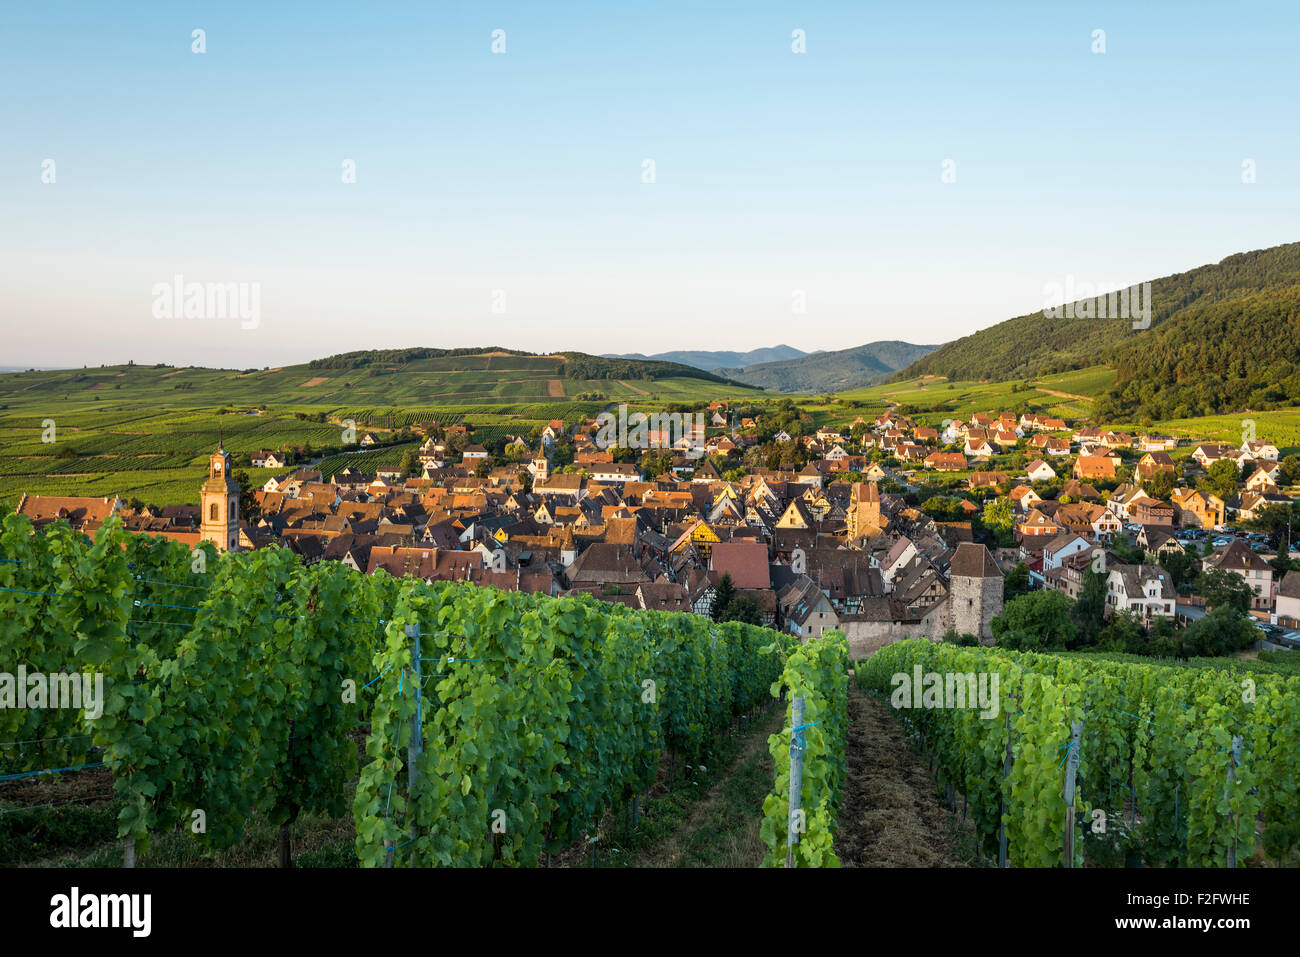 Village and vineyards at sunrise, Riquewihr, Alsace, France Stock Photo